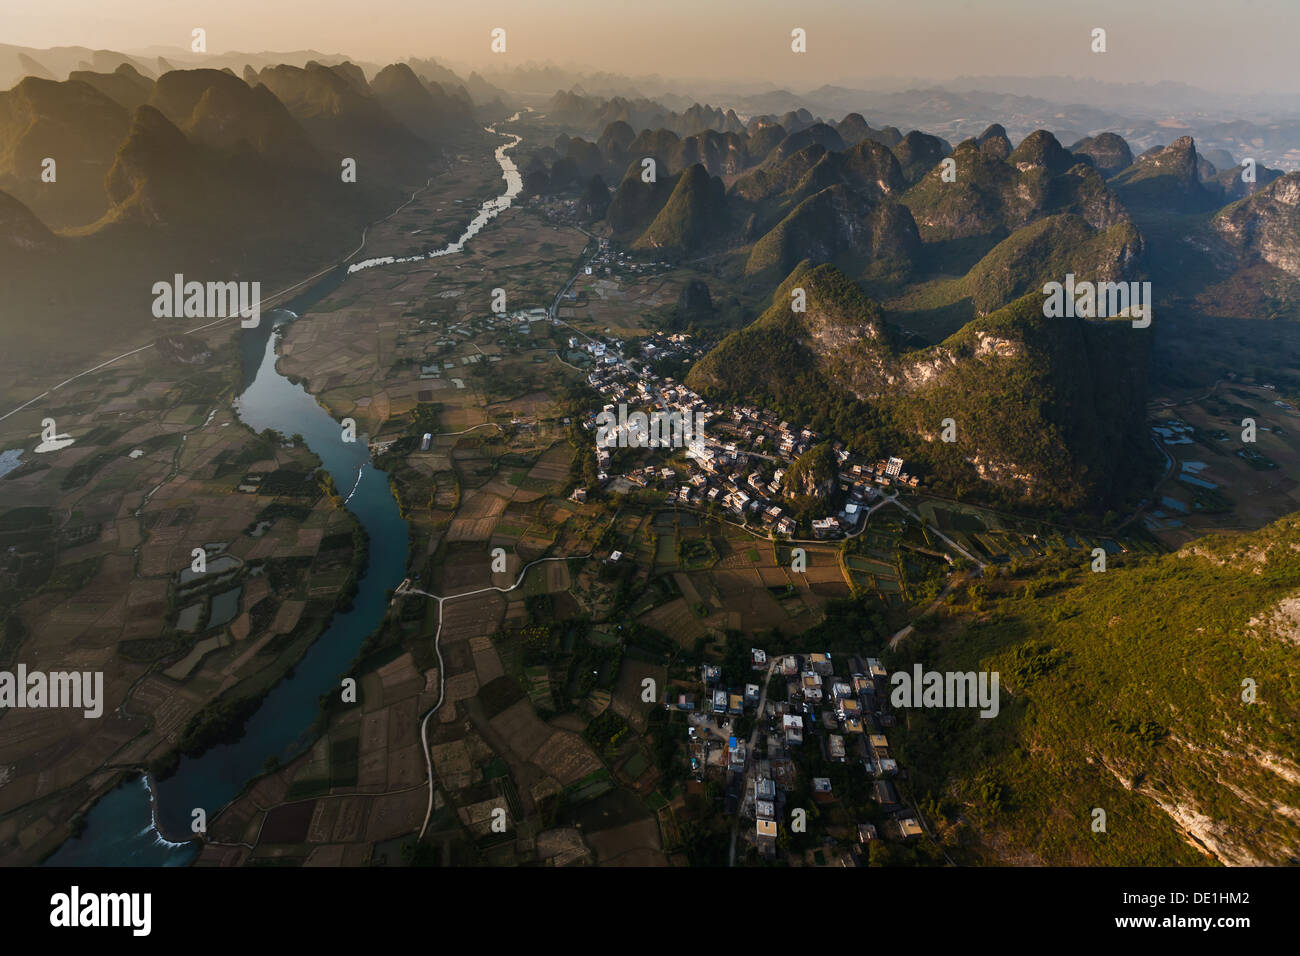 Aerial view of Li River valley towns and karst peaks in Henan Province China Stock Photo